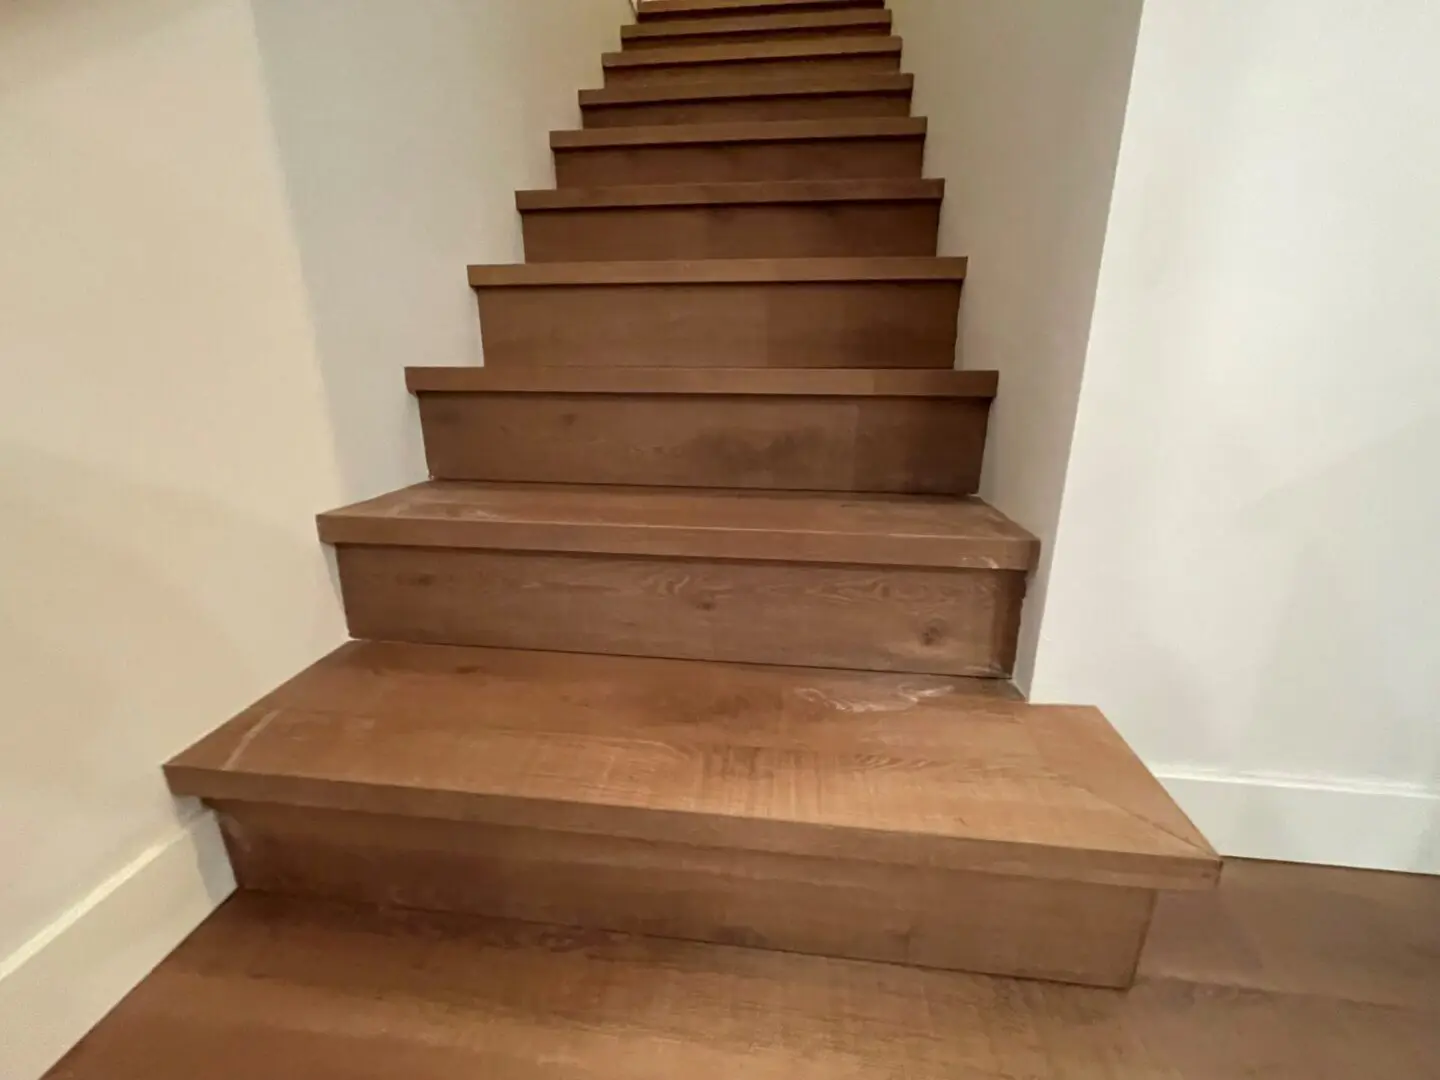 A picture of a brown color stairs build inside the house